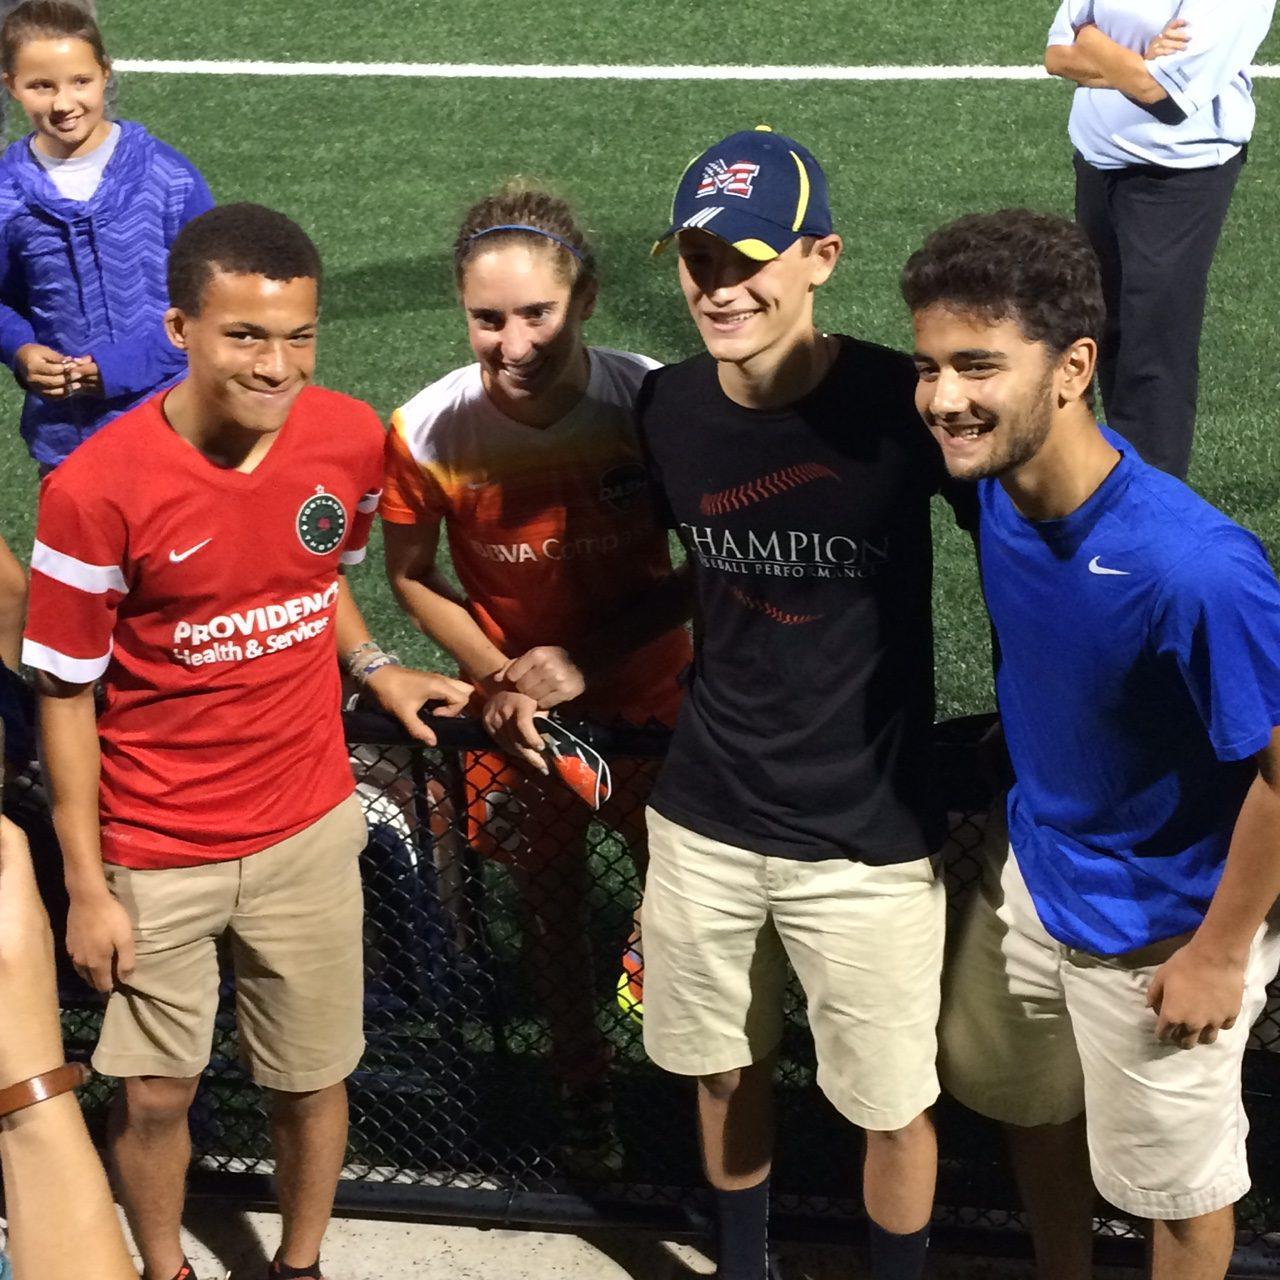 Bennett Walkes, Cam Dubin, and Mike Ryter of Newton South's Denebola snap a post-game photo with Houston Dash/US women's national team midfielder Morgan Brian after the game at Harvard's Jordan Field on Aug. 31. 